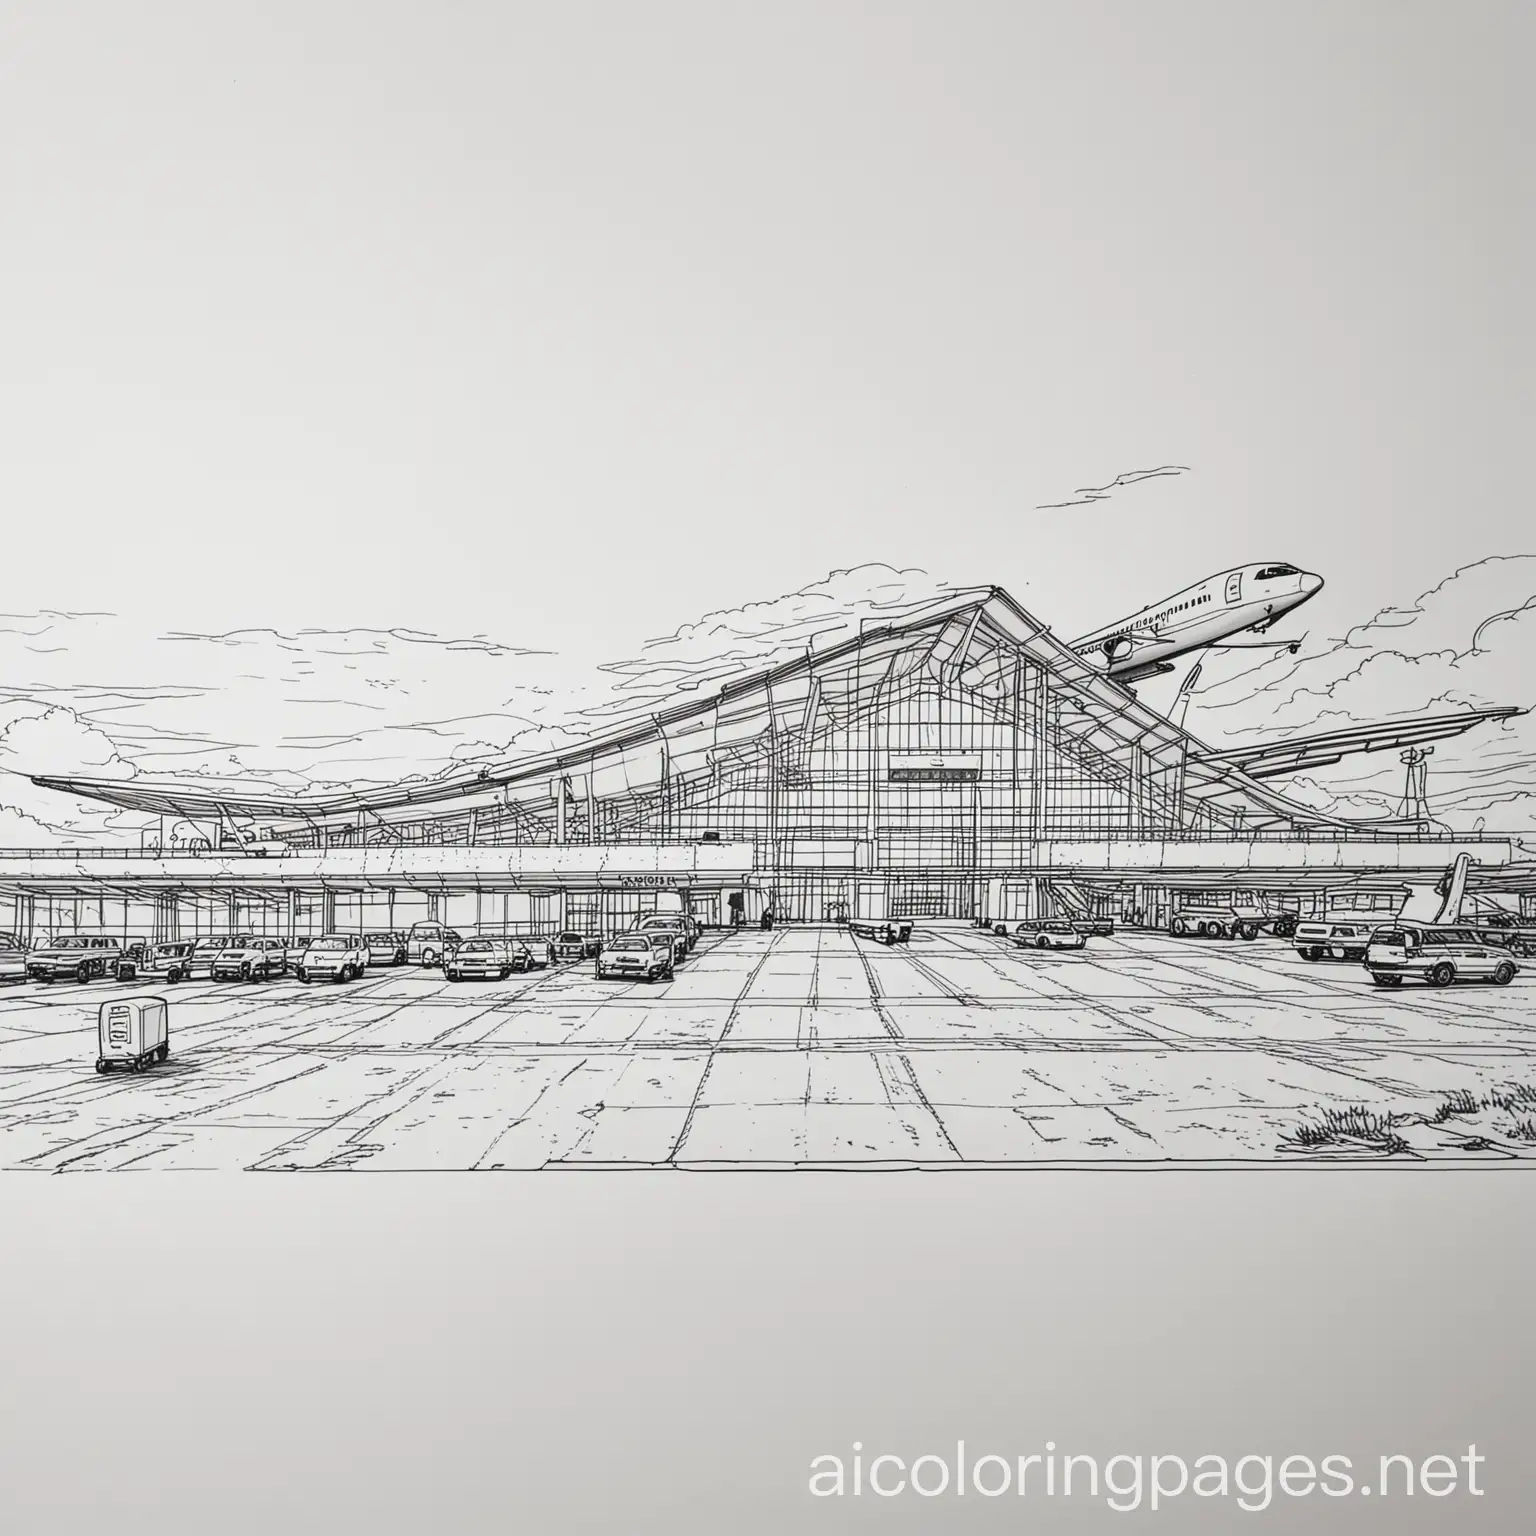 airport, Coloring Page, black and white, line art, white background, Simplicity, Ample White Space. The background of the coloring page is plain white to make it easy for young children to color within the lines. The outlines of all the subjects are easy to distinguish, making it simple for kids to color without too much difficulty